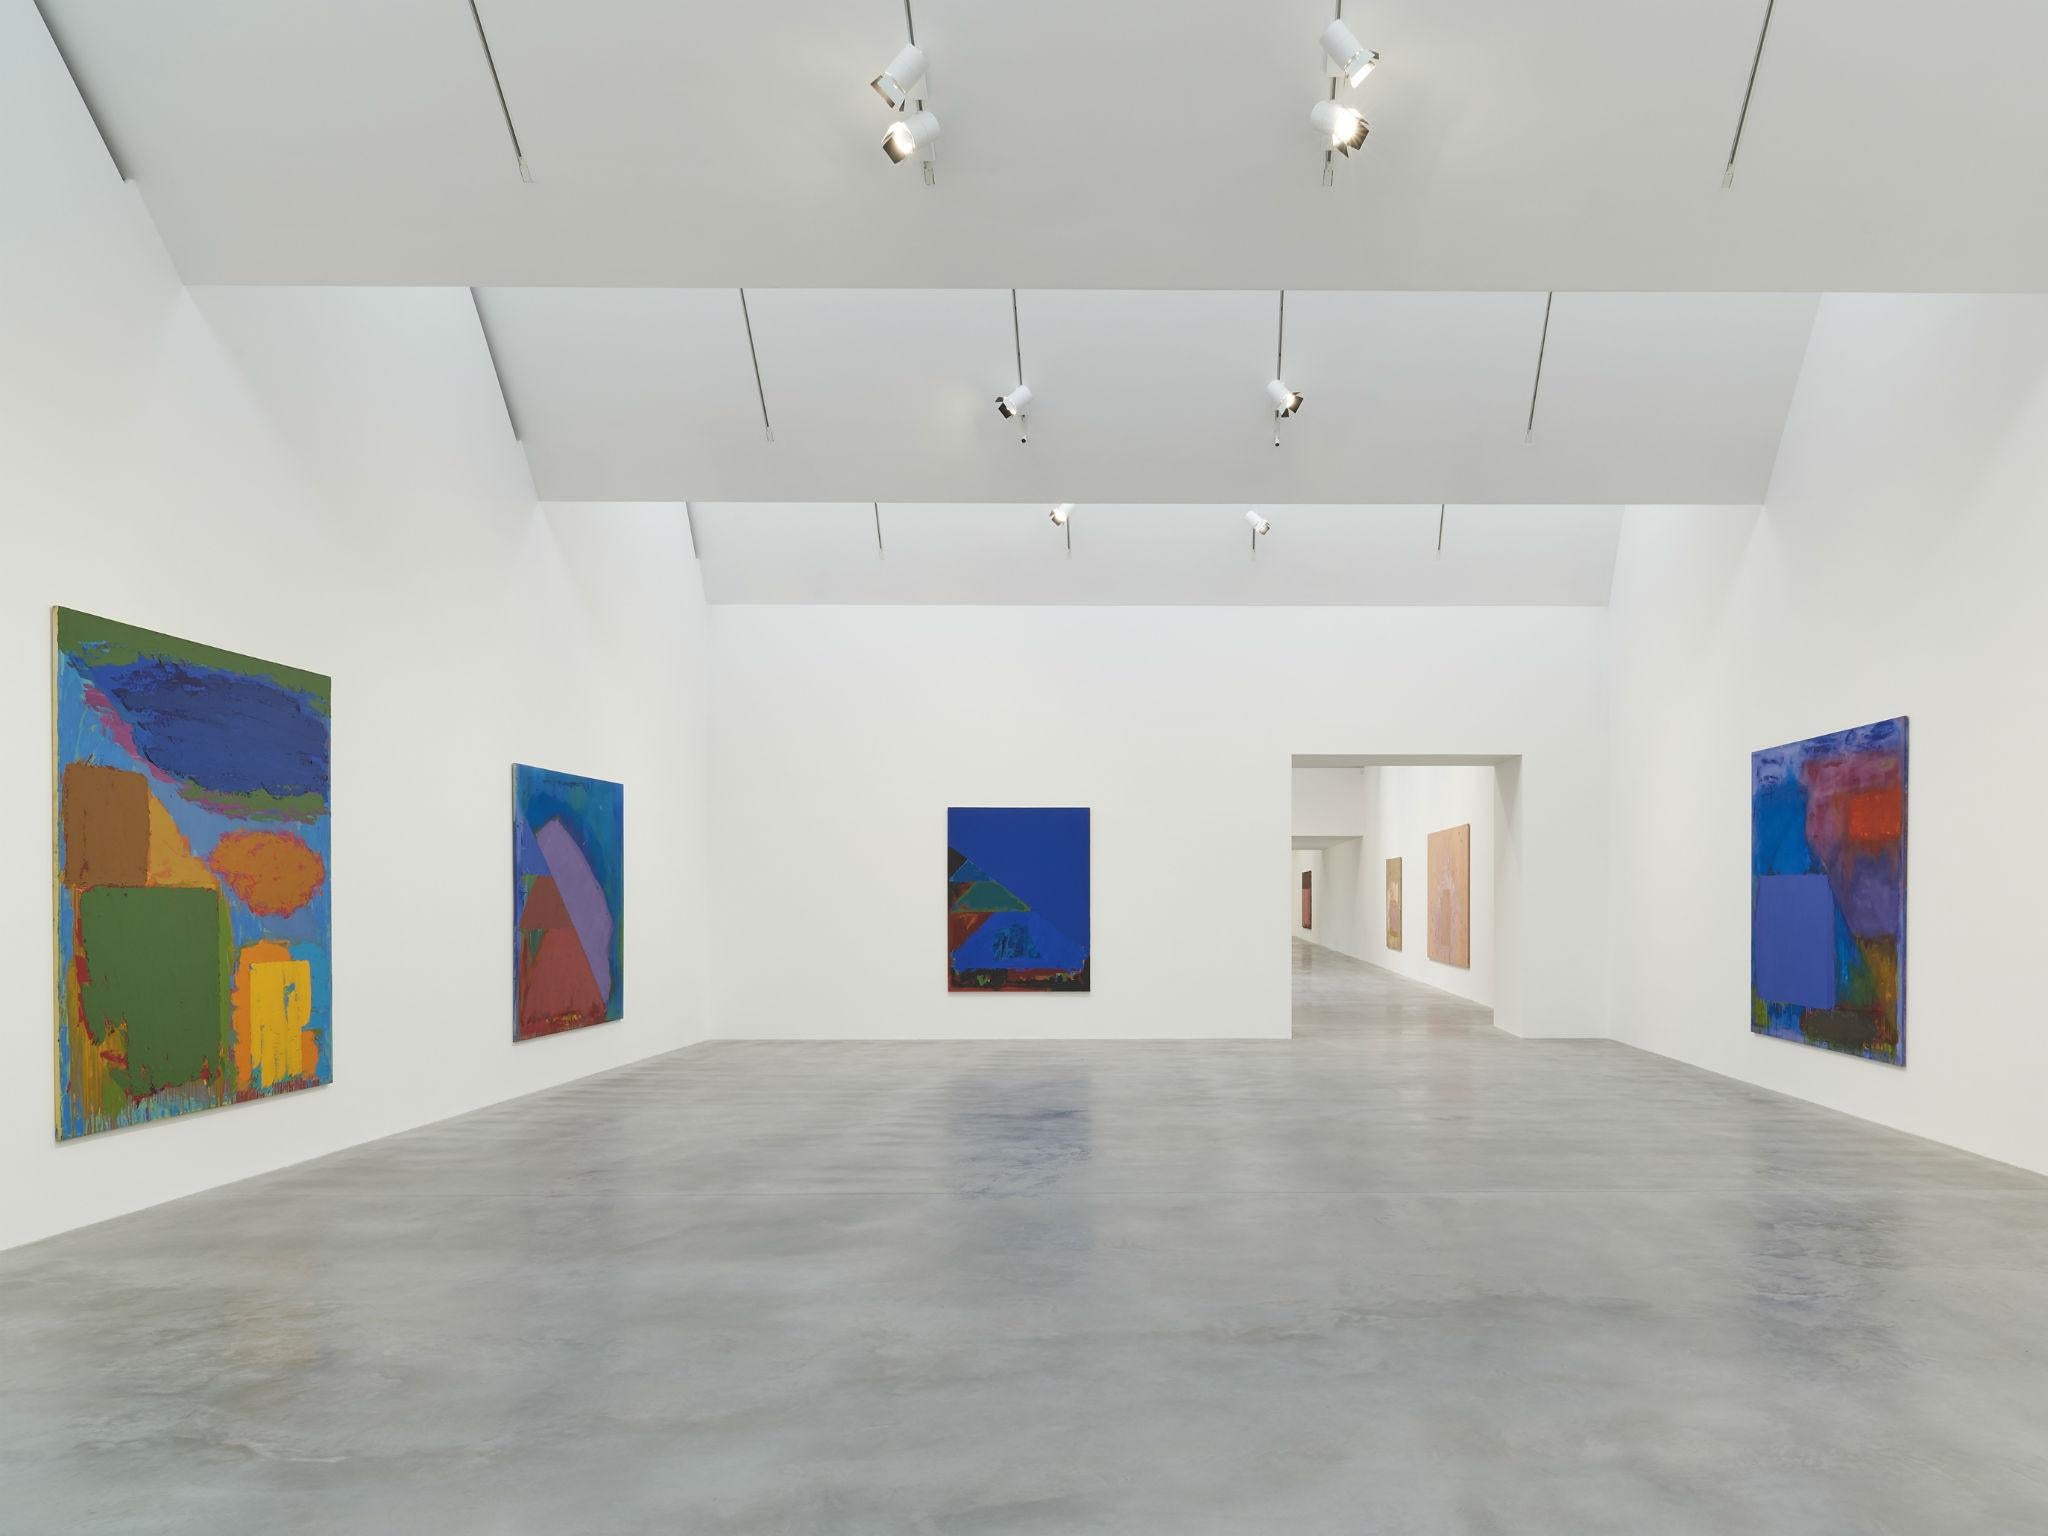 Damien Hirst's private art collection is displayed in the Newport Street Gallery